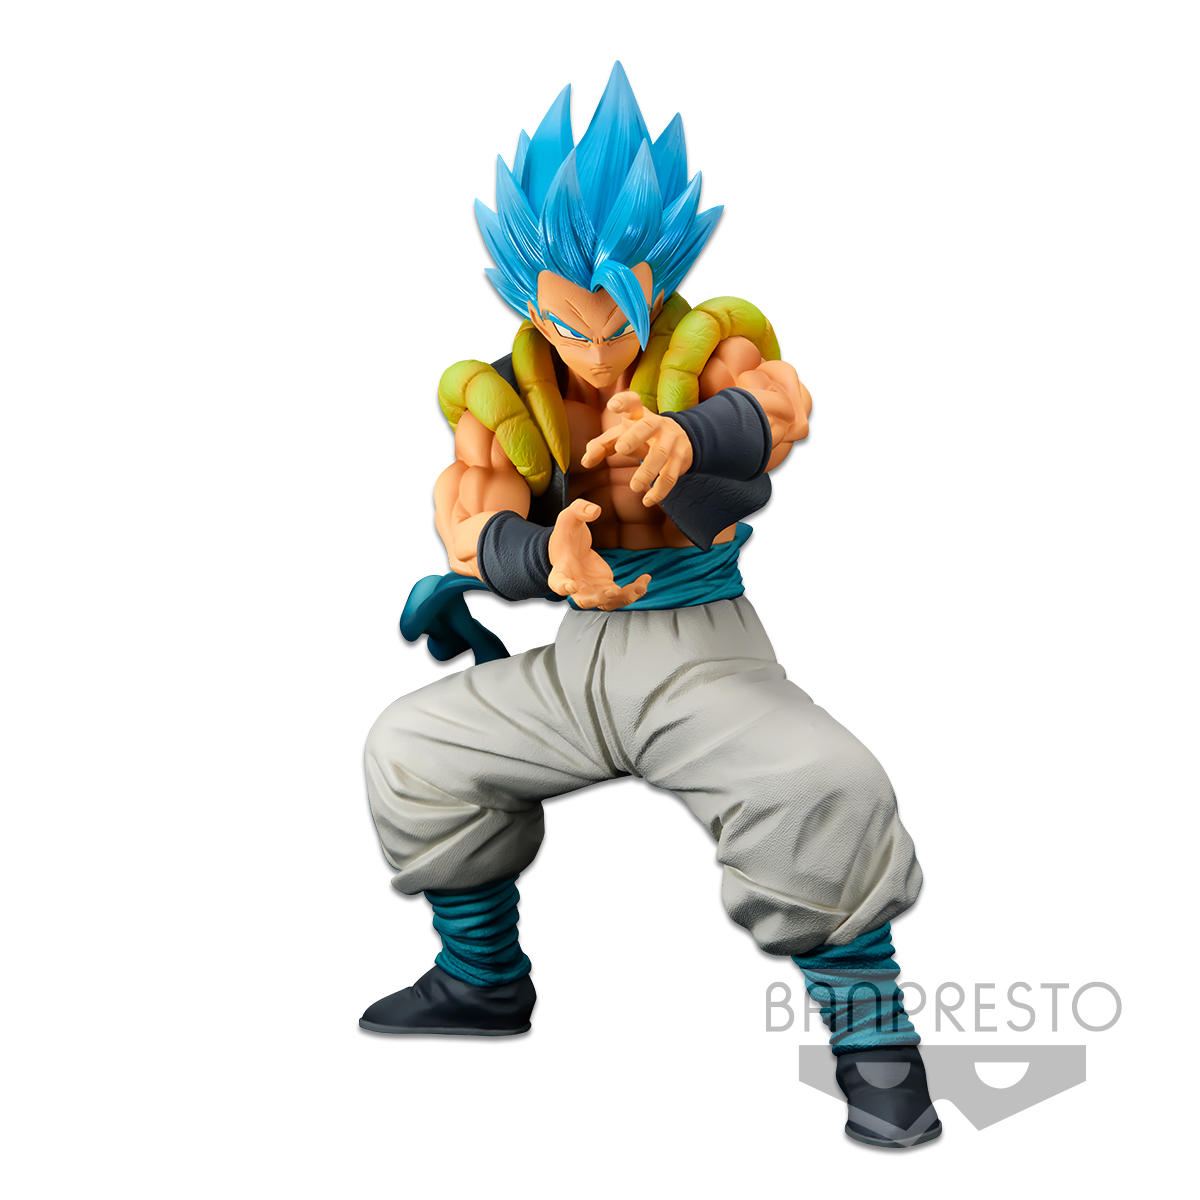 Dragon Ball Super Broly Gogeta SSGSS Ultimate Soldiers The Movie 2019 Figur 23cm